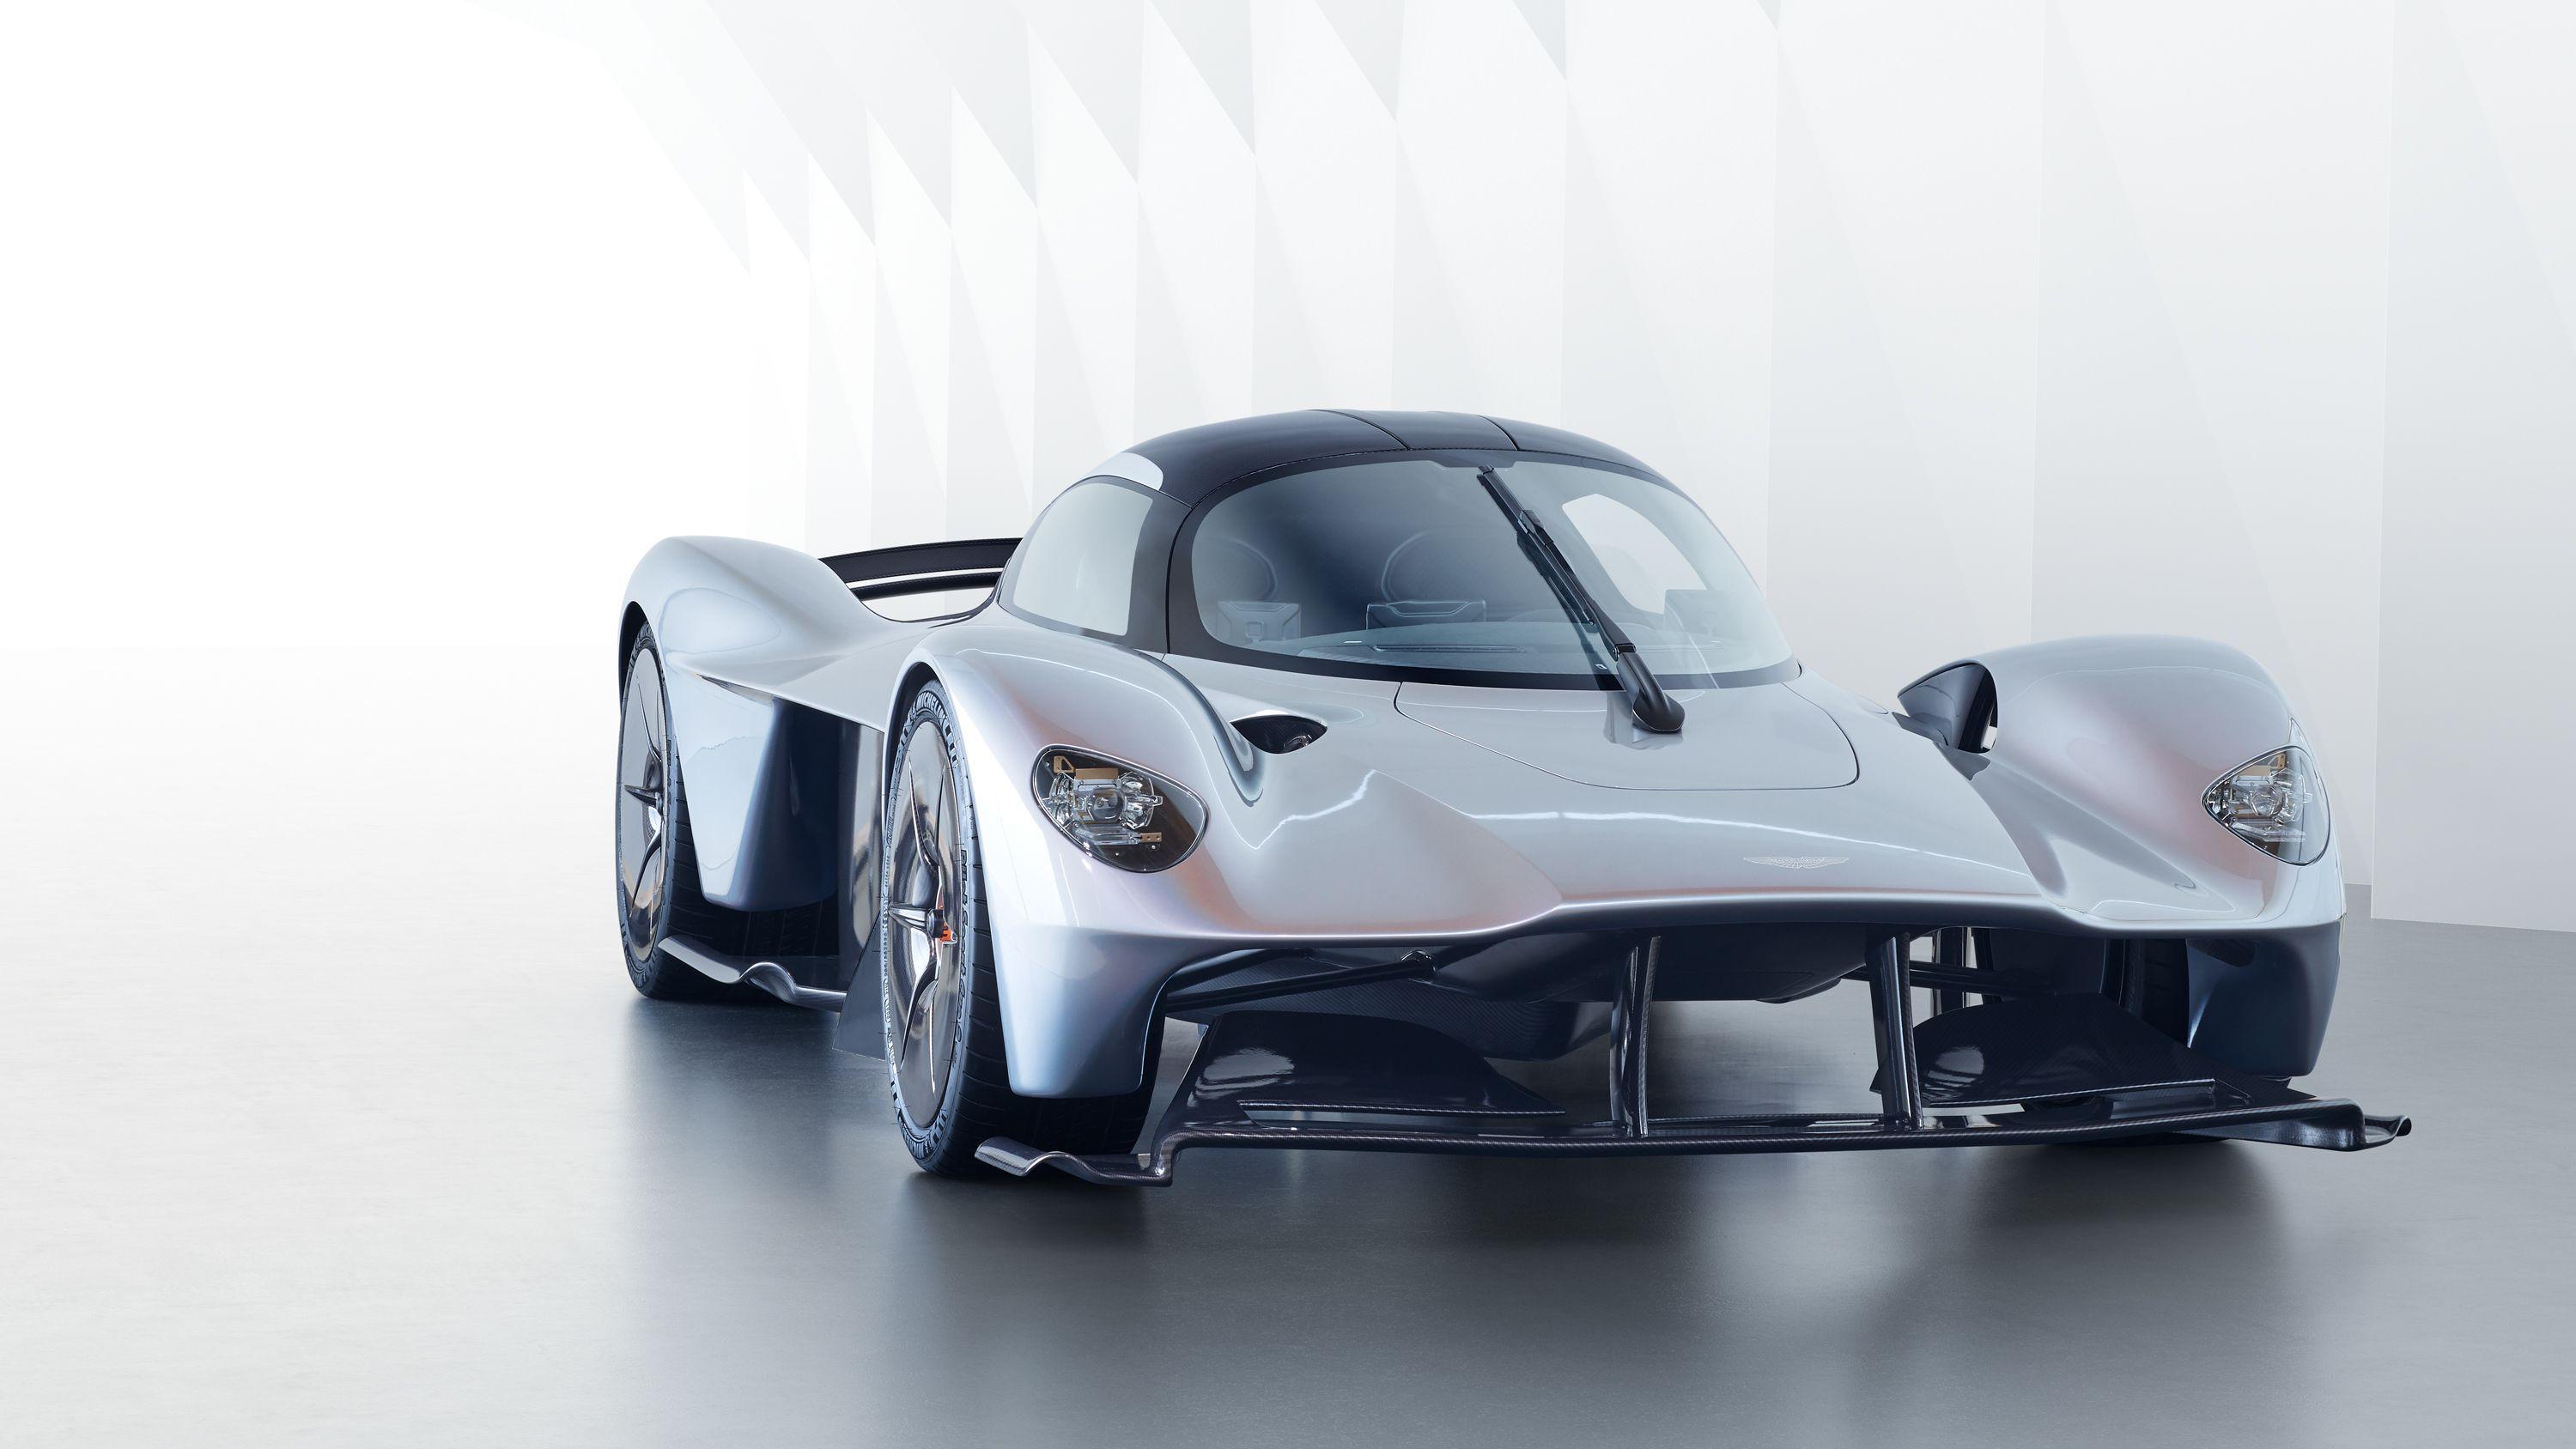 Aston Martin Valkyrie Wallpapers Top Free Aston Martin Valkyrie Backgrounds Wallpaperaccess